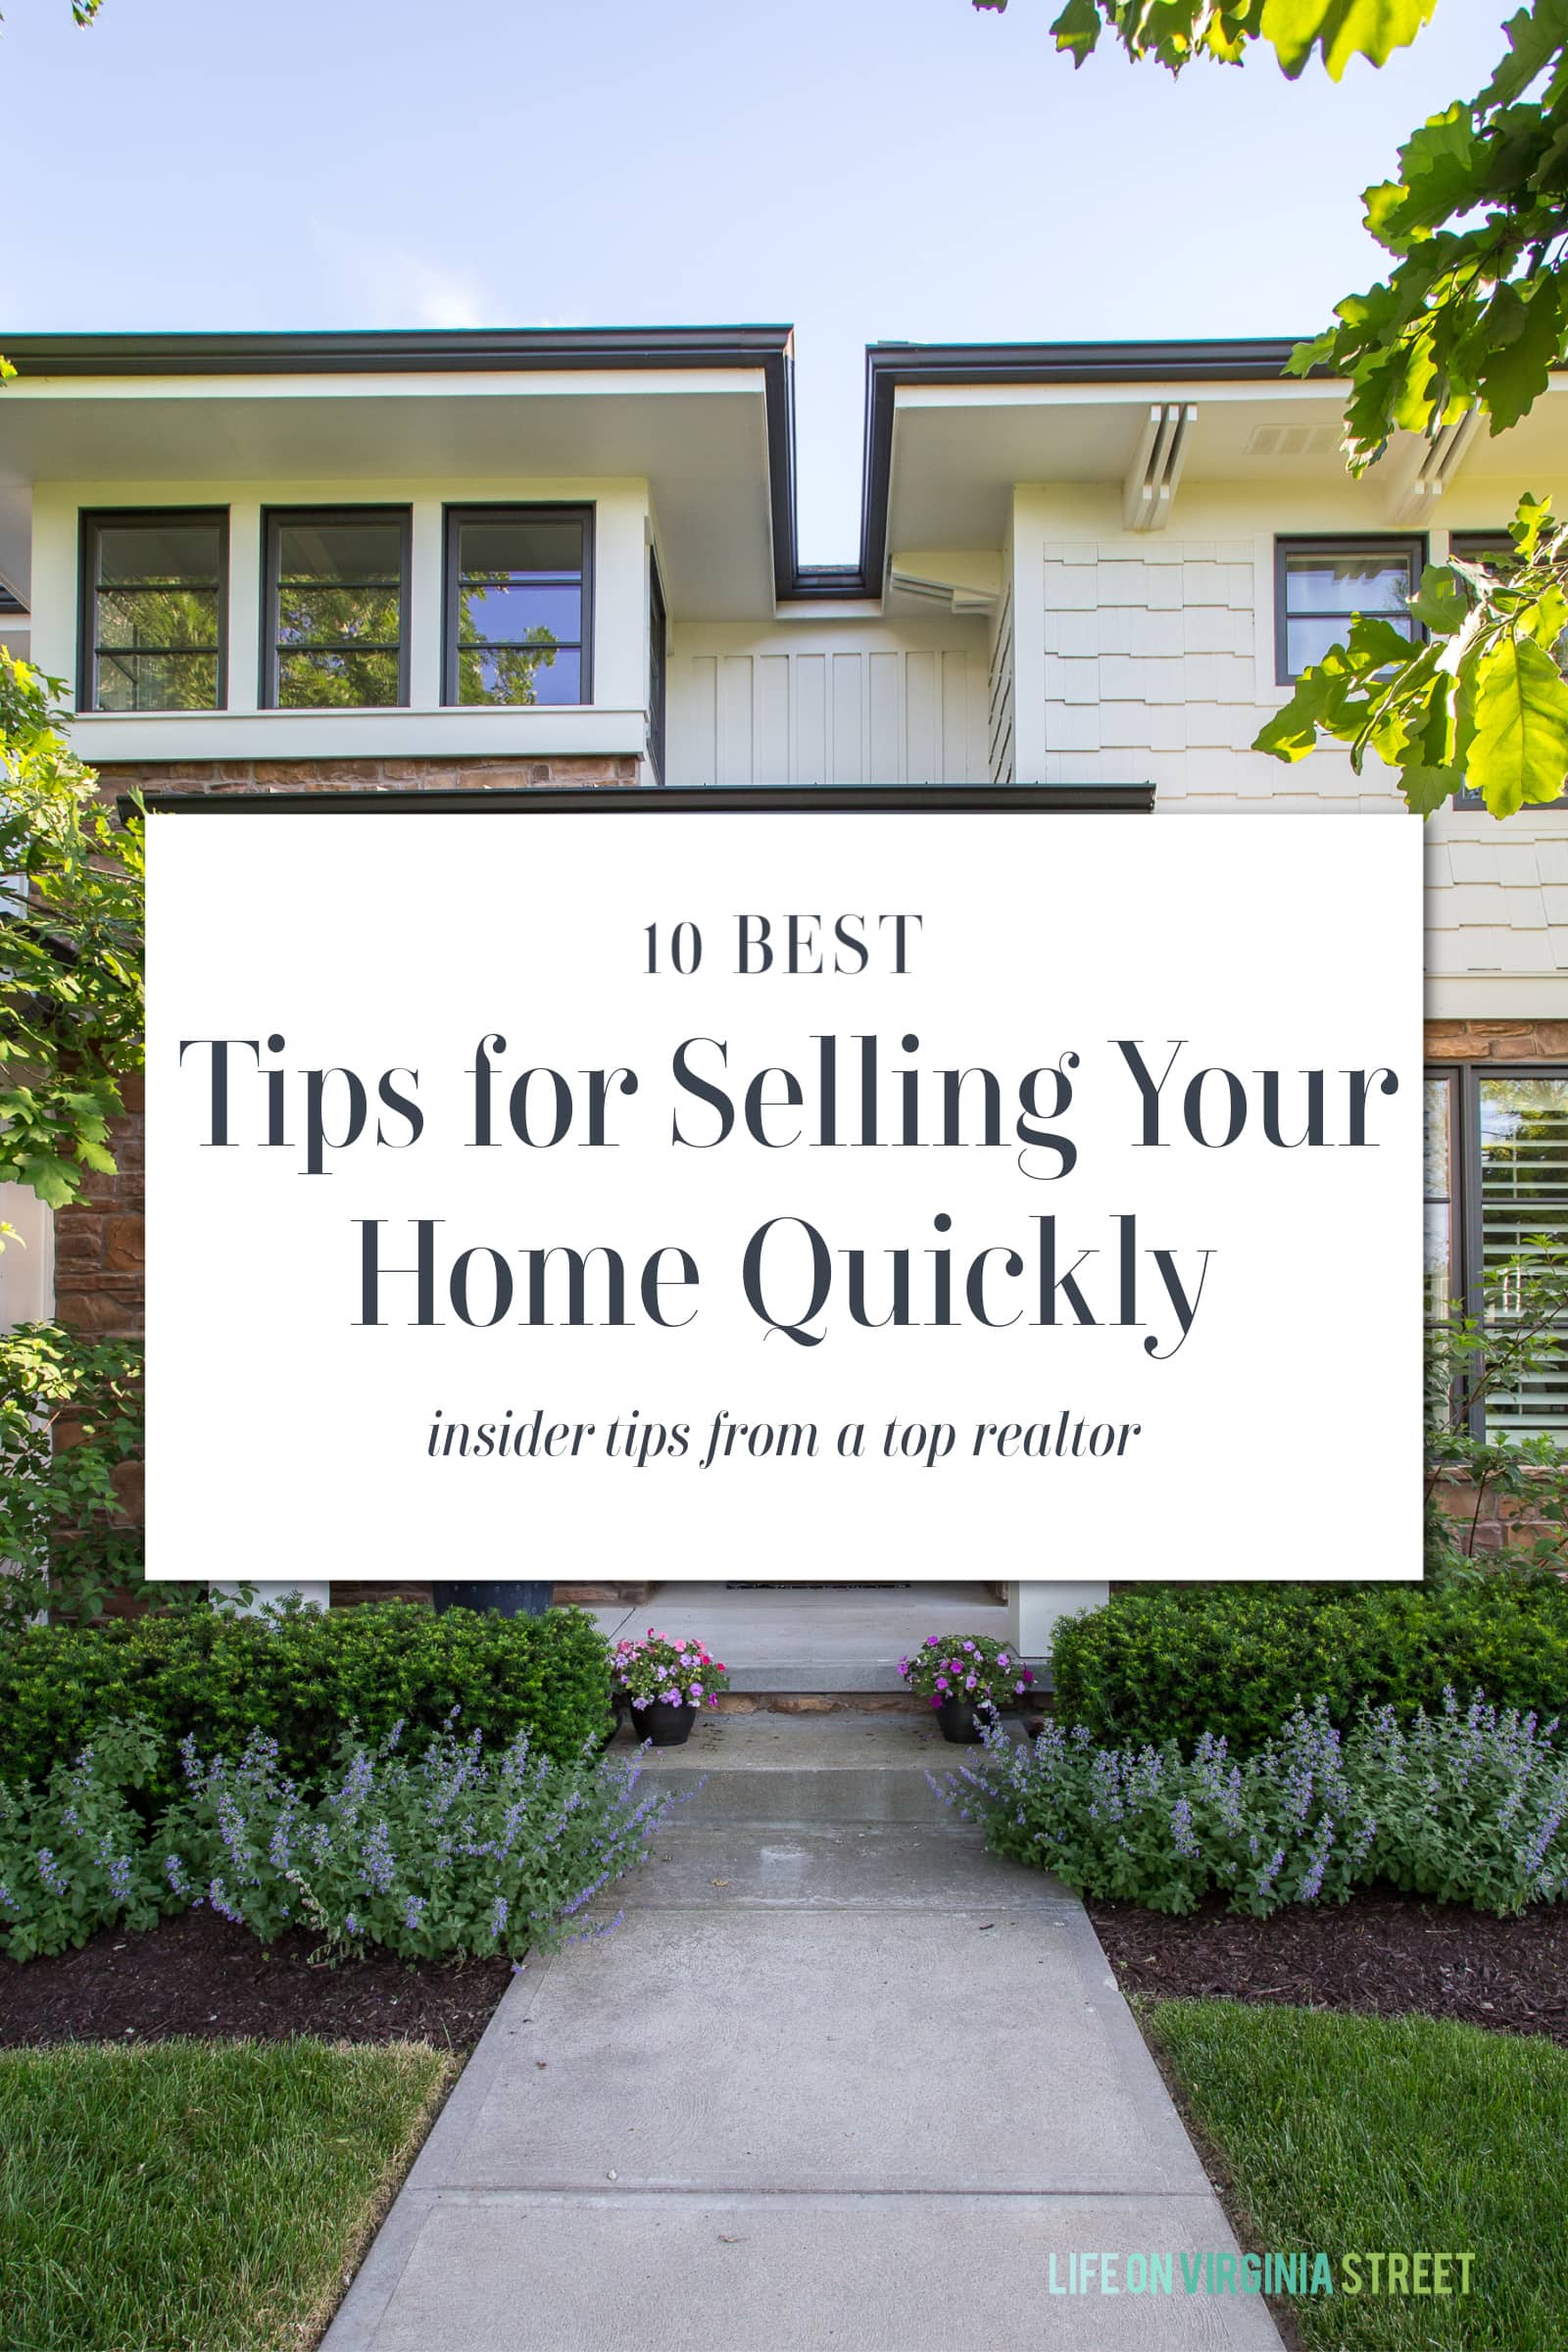 Tips for selling your home Archives - Blog